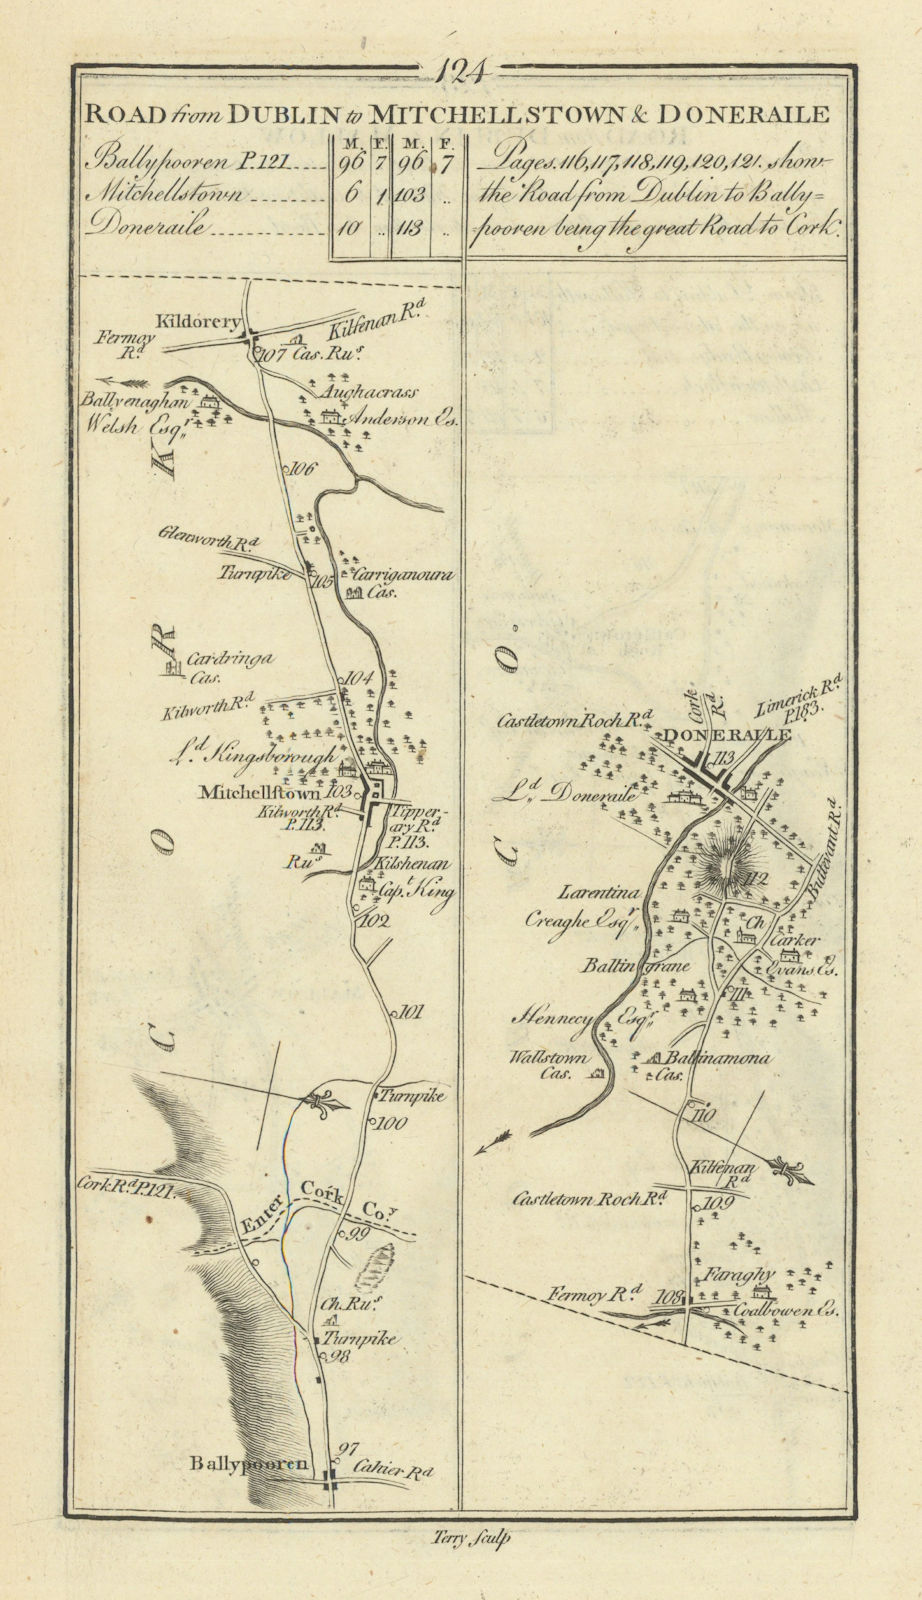 Associate Product #124 Dublin to Mitchelstown & Doneraile. Kildorrery. TAYLOR/SKINNER 1778 map